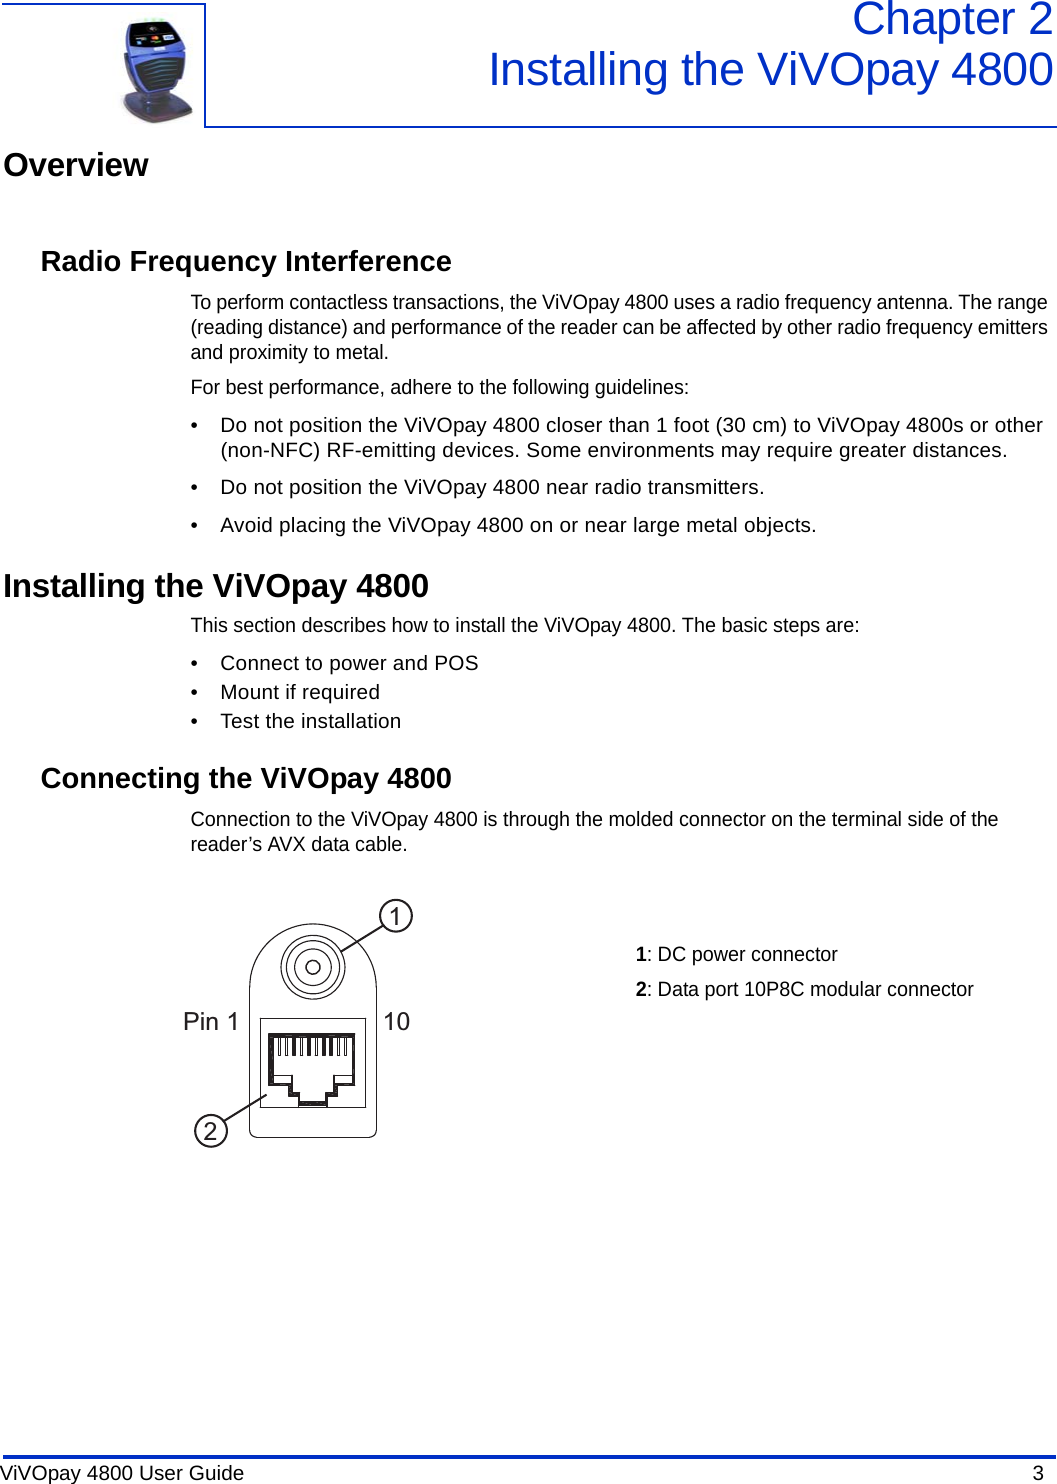 ViVOpay 4800 User Guide  3               Chapter 2Installing the ViVOpay 4800OverviewRadio Frequency InterferenceTo perform contactless transactions, the ViVOpay 4800 uses a radio frequency antenna. The range (reading distance) and performance of the reader can be affected by other radio frequency emitters and proximity to metal. For best performance, adhere to the following guidelines:• Do not position the ViVOpay 4800 closer than 1 foot (30 cm) to ViVOpay 4800s or other (non-NFC) RF-emitting devices. Some environments may require greater distances.• Do not position the ViVOpay 4800 near radio transmitters.• Avoid placing the ViVOpay 4800 on or near large metal objects.Installing the ViVOpay 4800This section describes how to install the ViVOpay 4800. The basic steps are:• Connect to power and POS• Mount if required• Test the installationConnecting the ViVOpay 4800Connection to the ViVOpay 4800 is through the molded connector on the terminal side of the reader’s AVX data cable. Pin 1 10121: DC power connector2: Data port 10P8C modular connector 